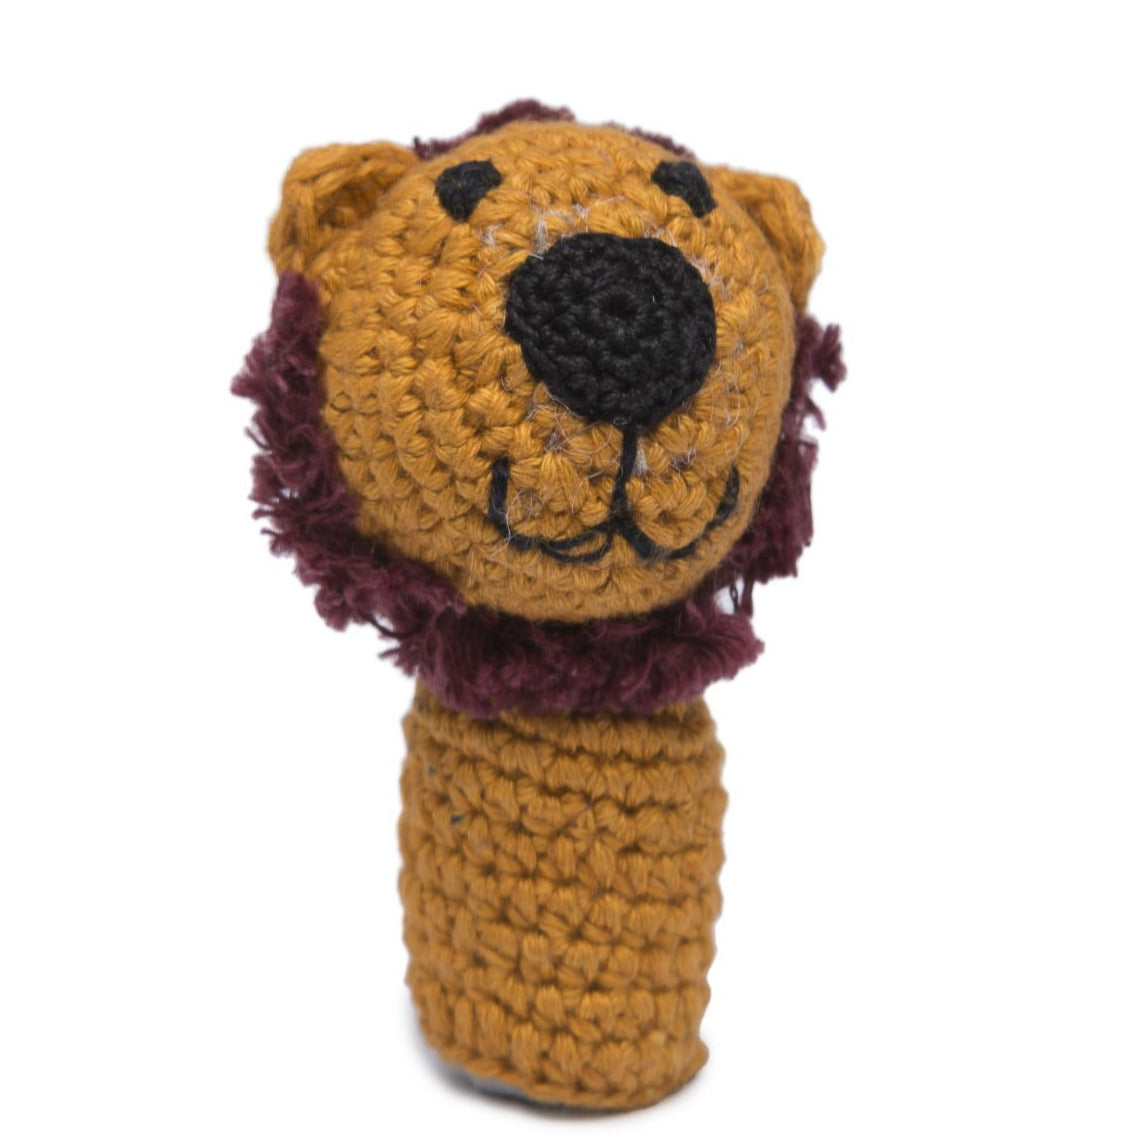 KeKiKa Panchtantra Finger Puppet Lion n Mouse Accessory Games/ Toys, children toys, woolen, crafted